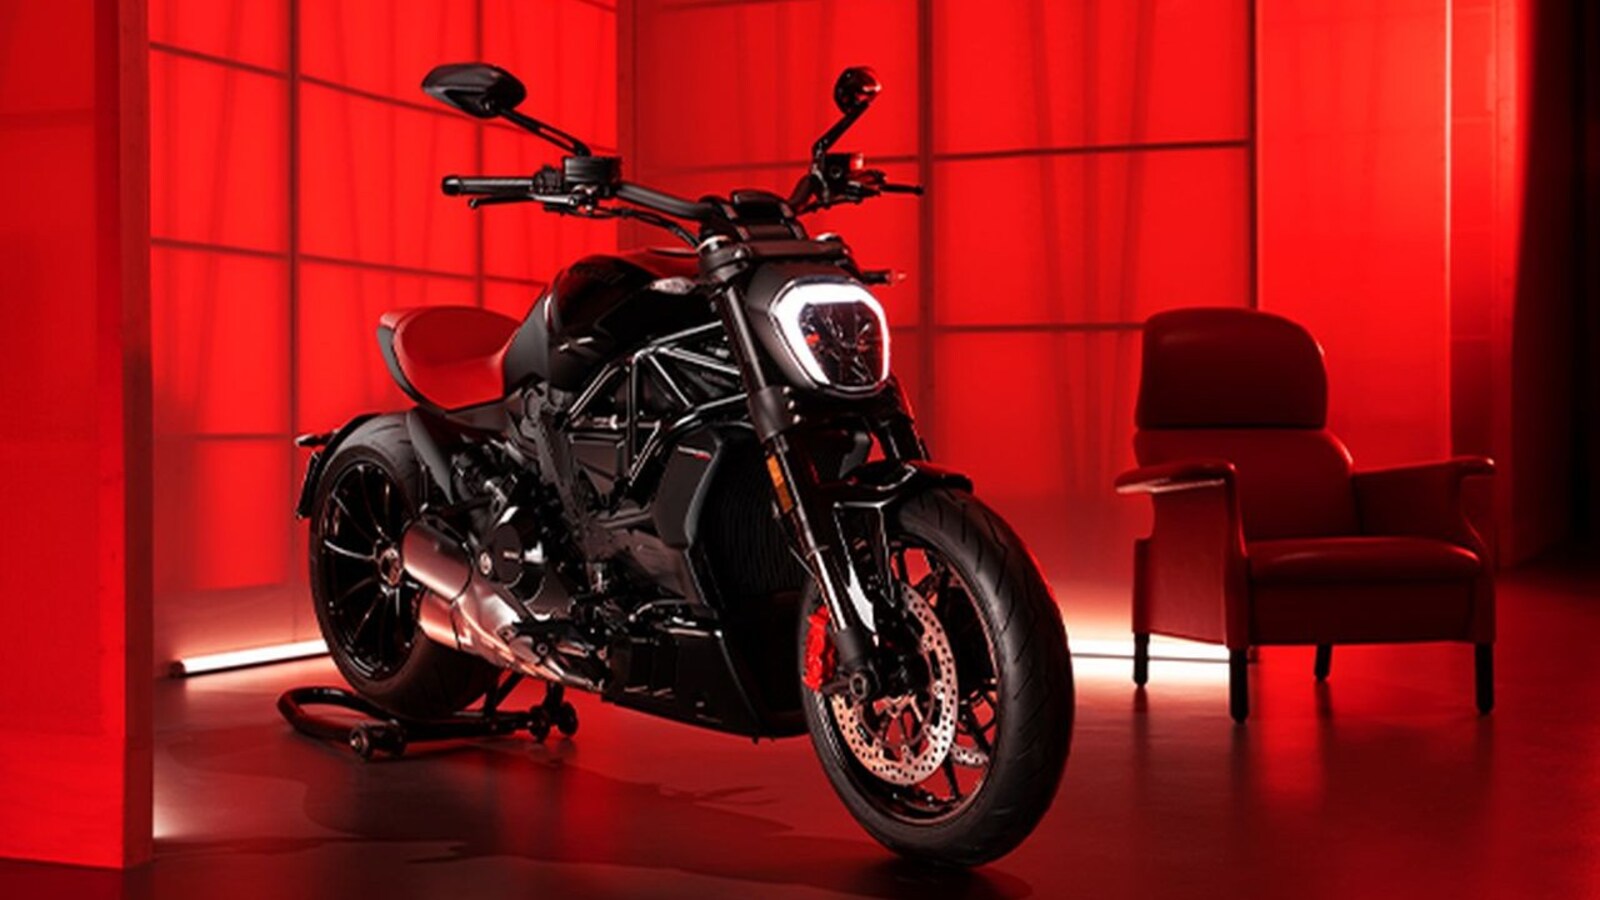 Ducati to launch 9 new motorcycles: From Panigale V4 R to Multistrada V4  Rally